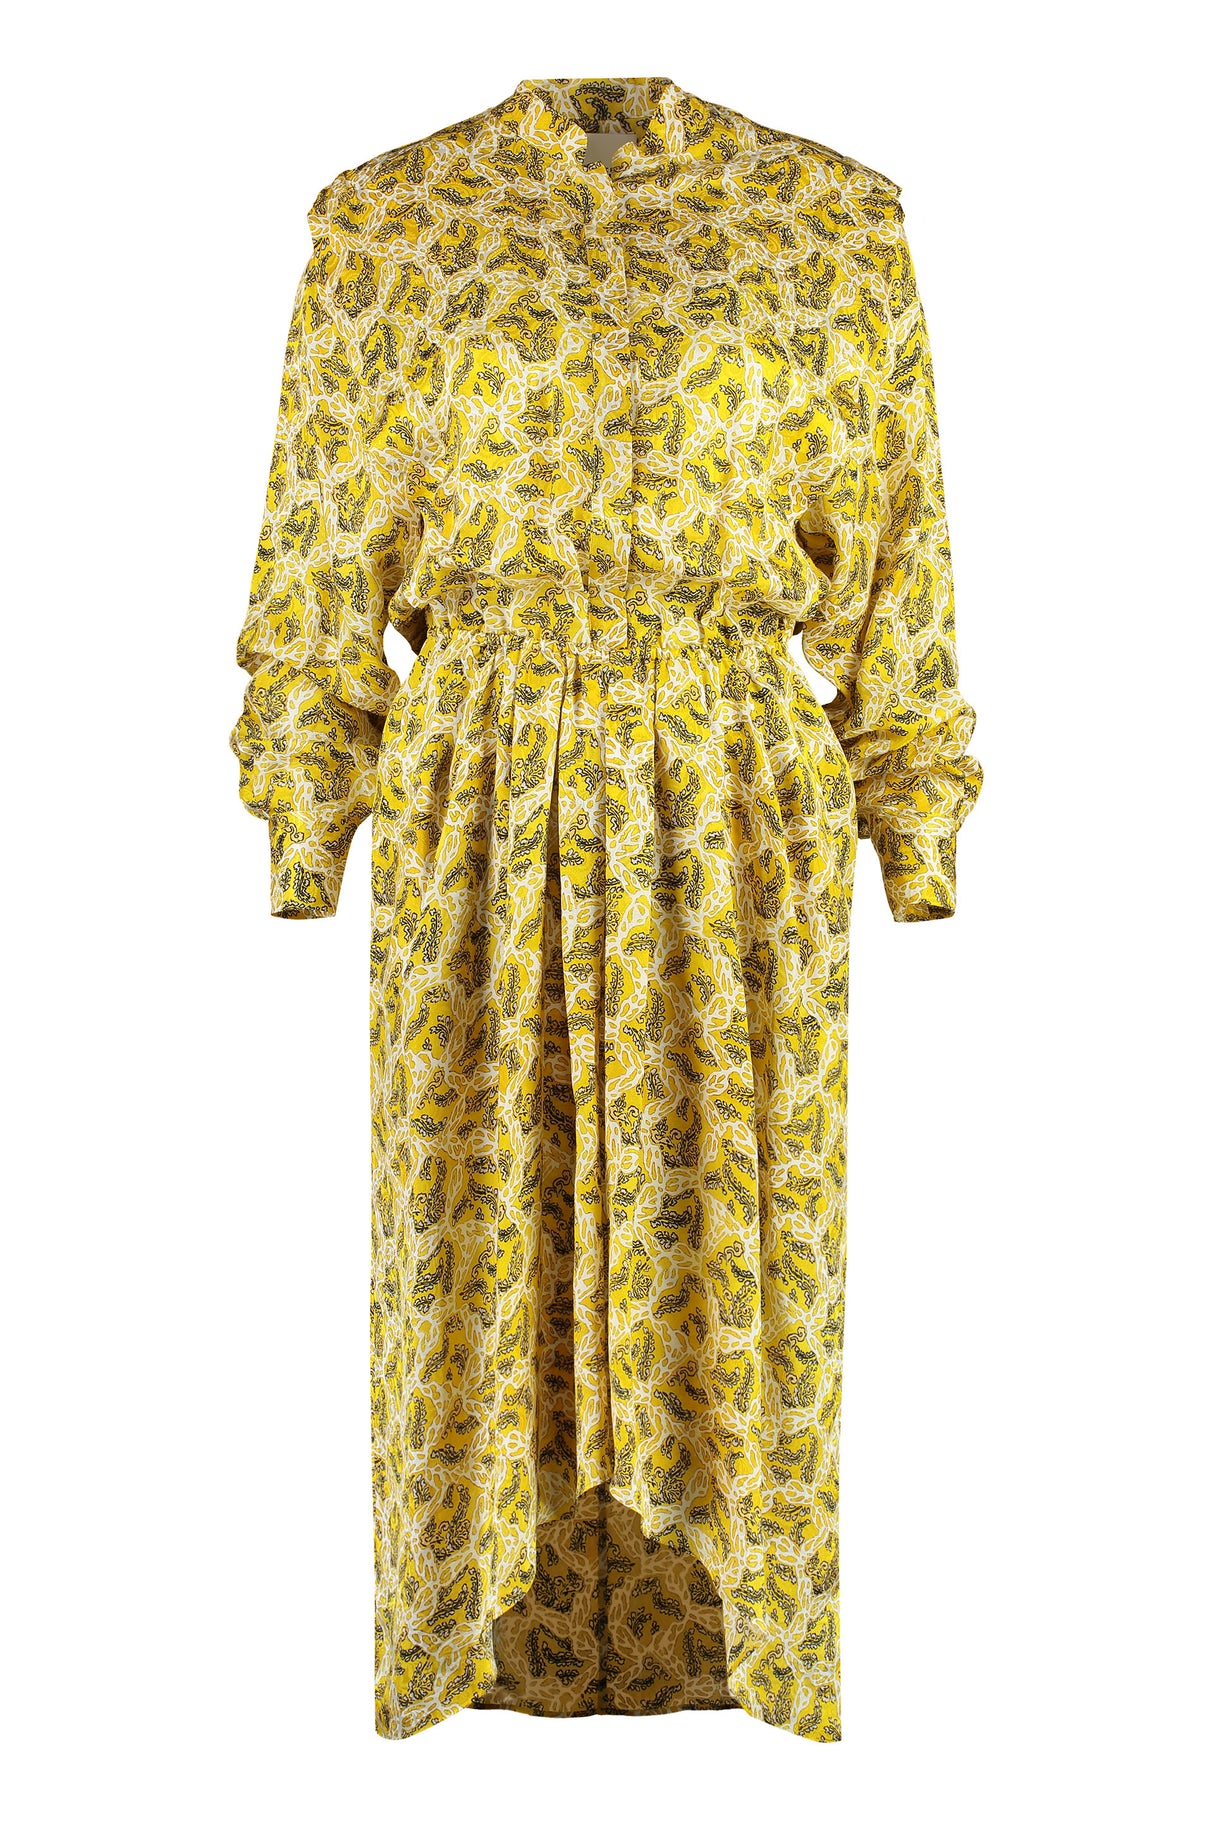 ISABEL MARANT Yellow Printed Dress with Buttoned Cuffs and Elasticated Waistband